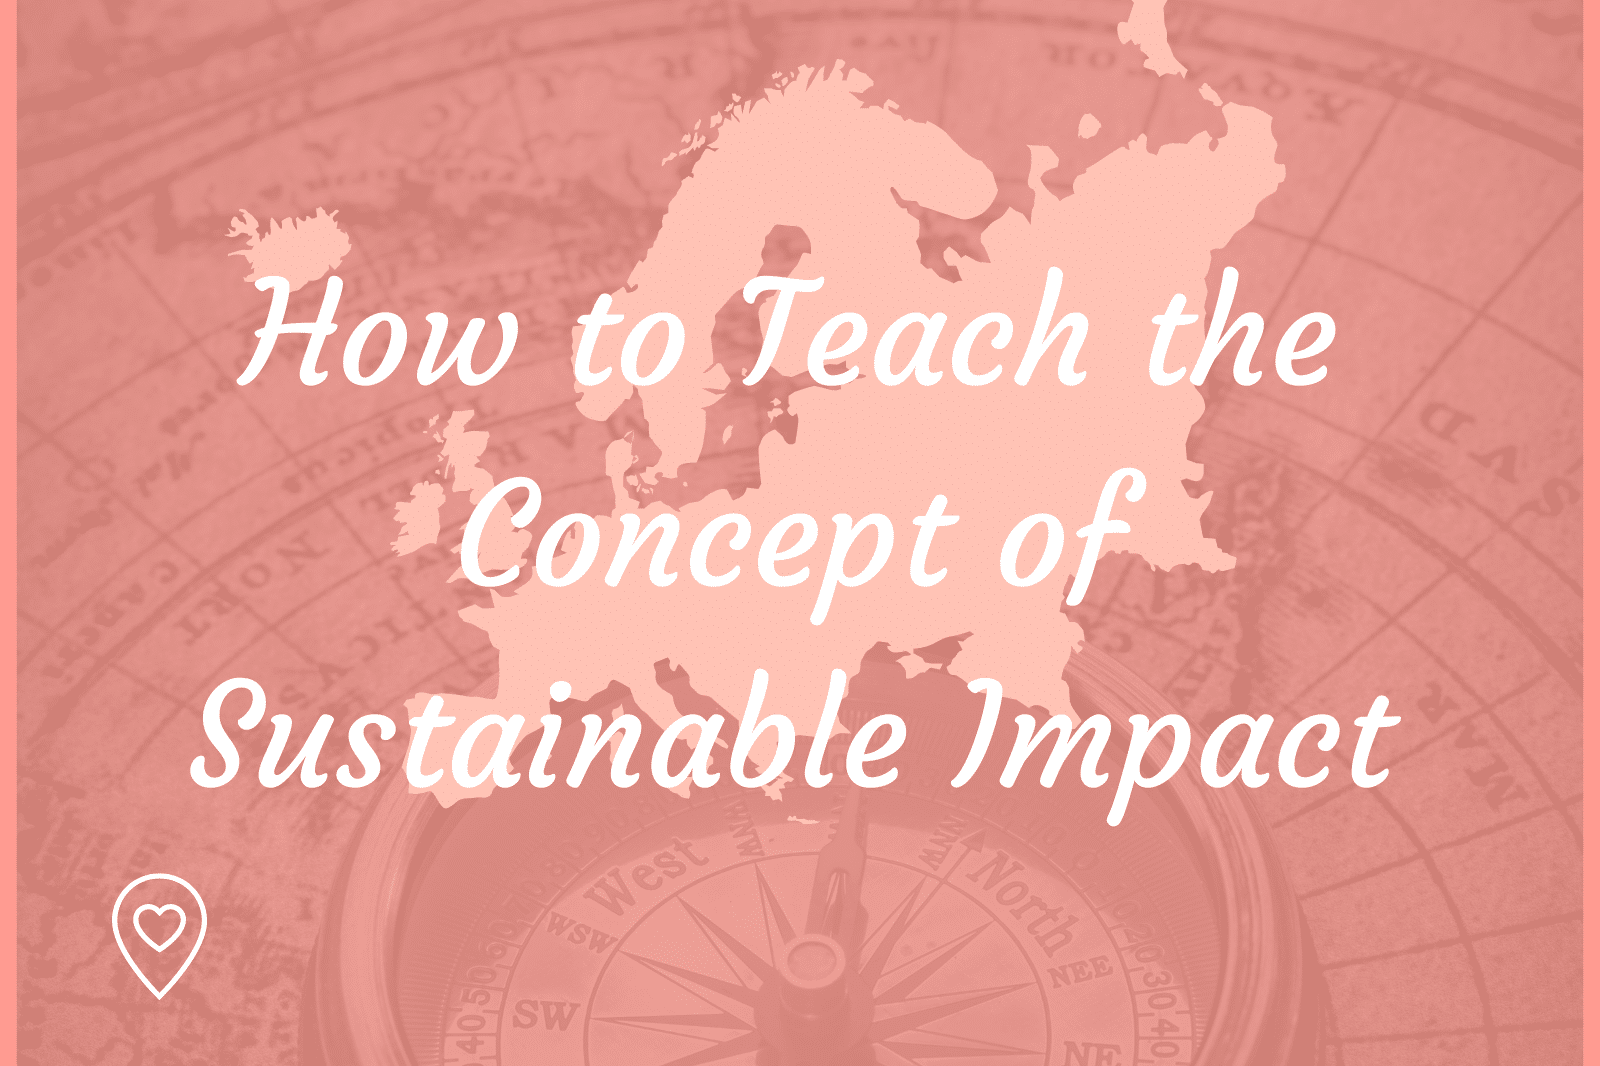 How to Teach the Concept of Sustainable Impact